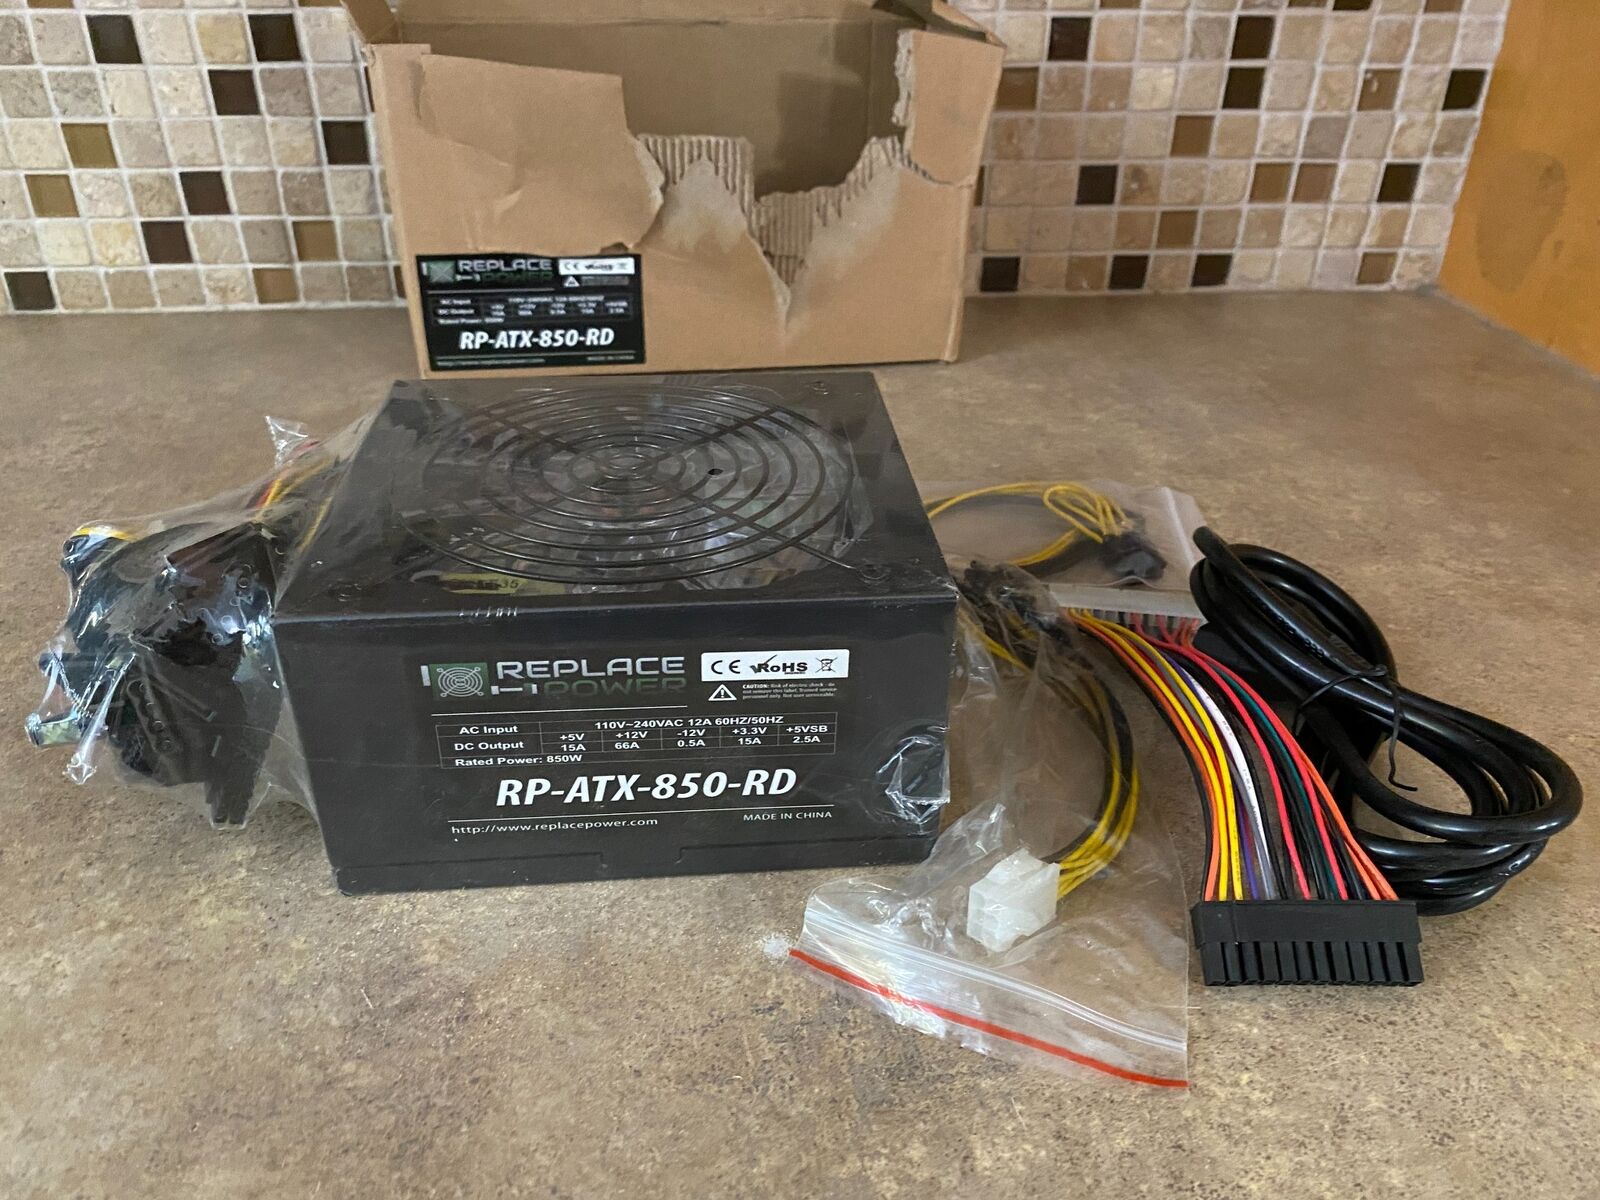 REPLACE POWER RP-ATX-850-RD 850W G1-26